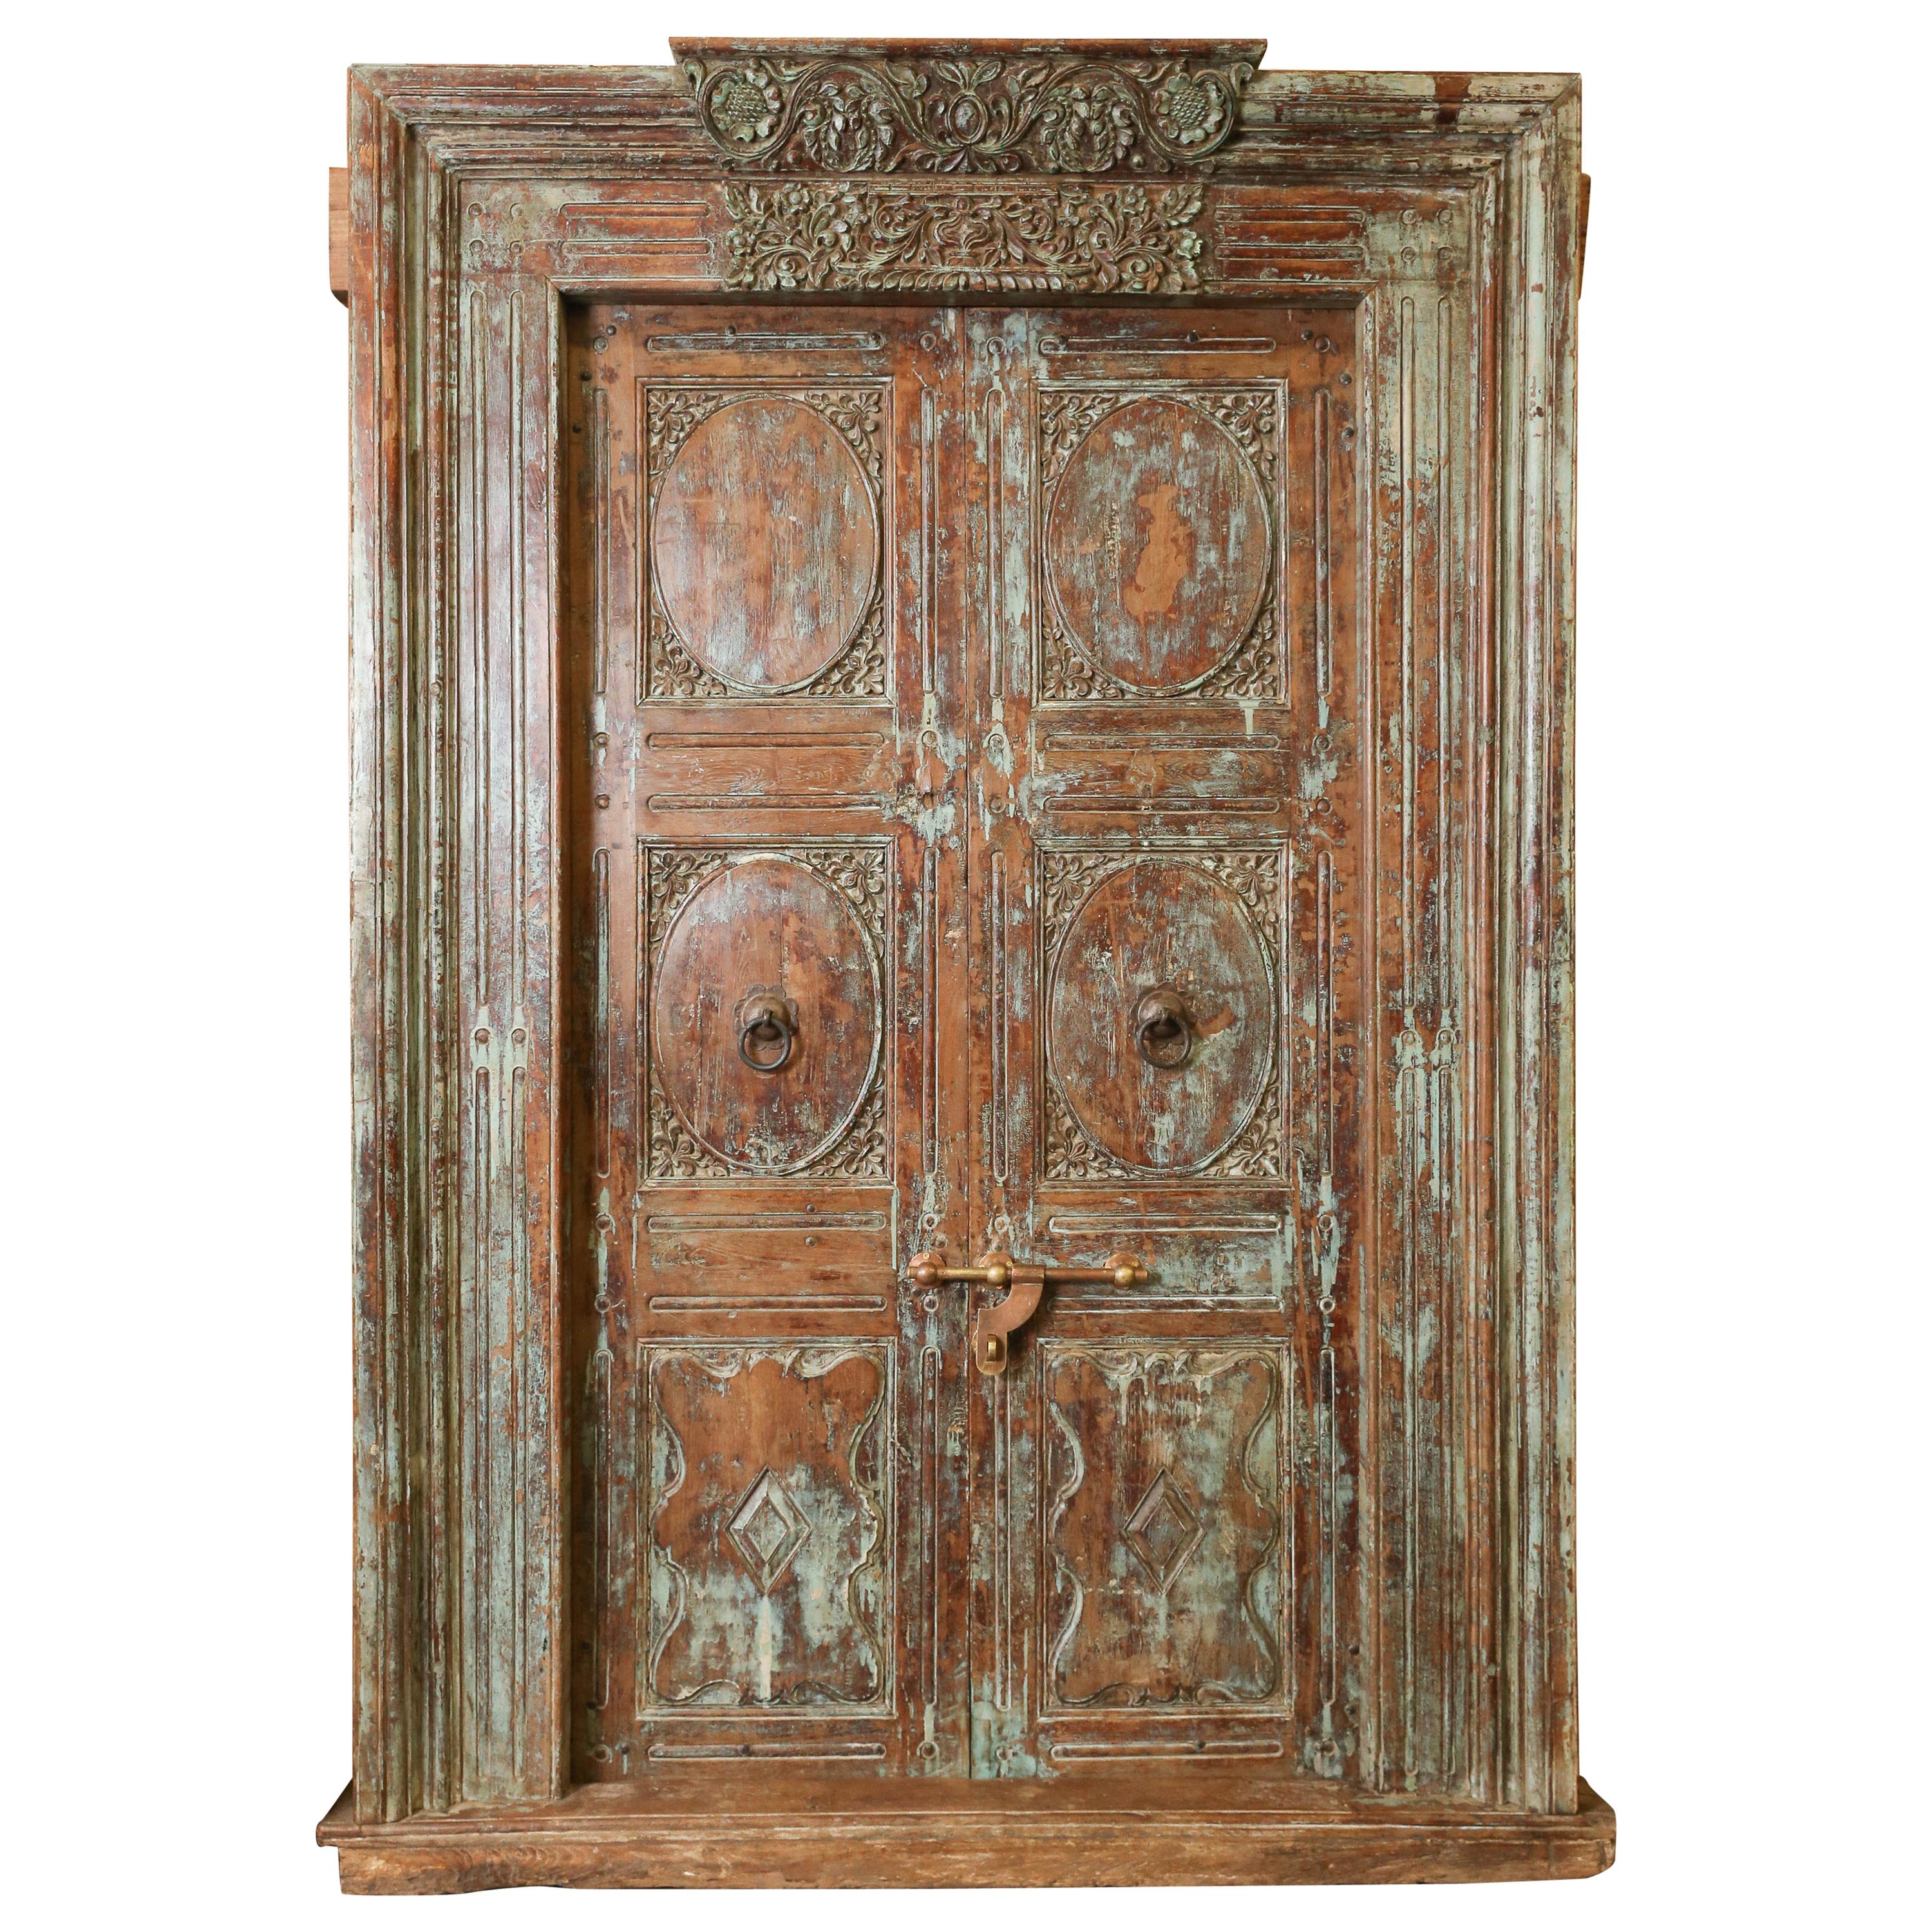 1850s Solid Teak Wood Elegant Entry Door from a Settlers Home in a Coastal Town For Sale